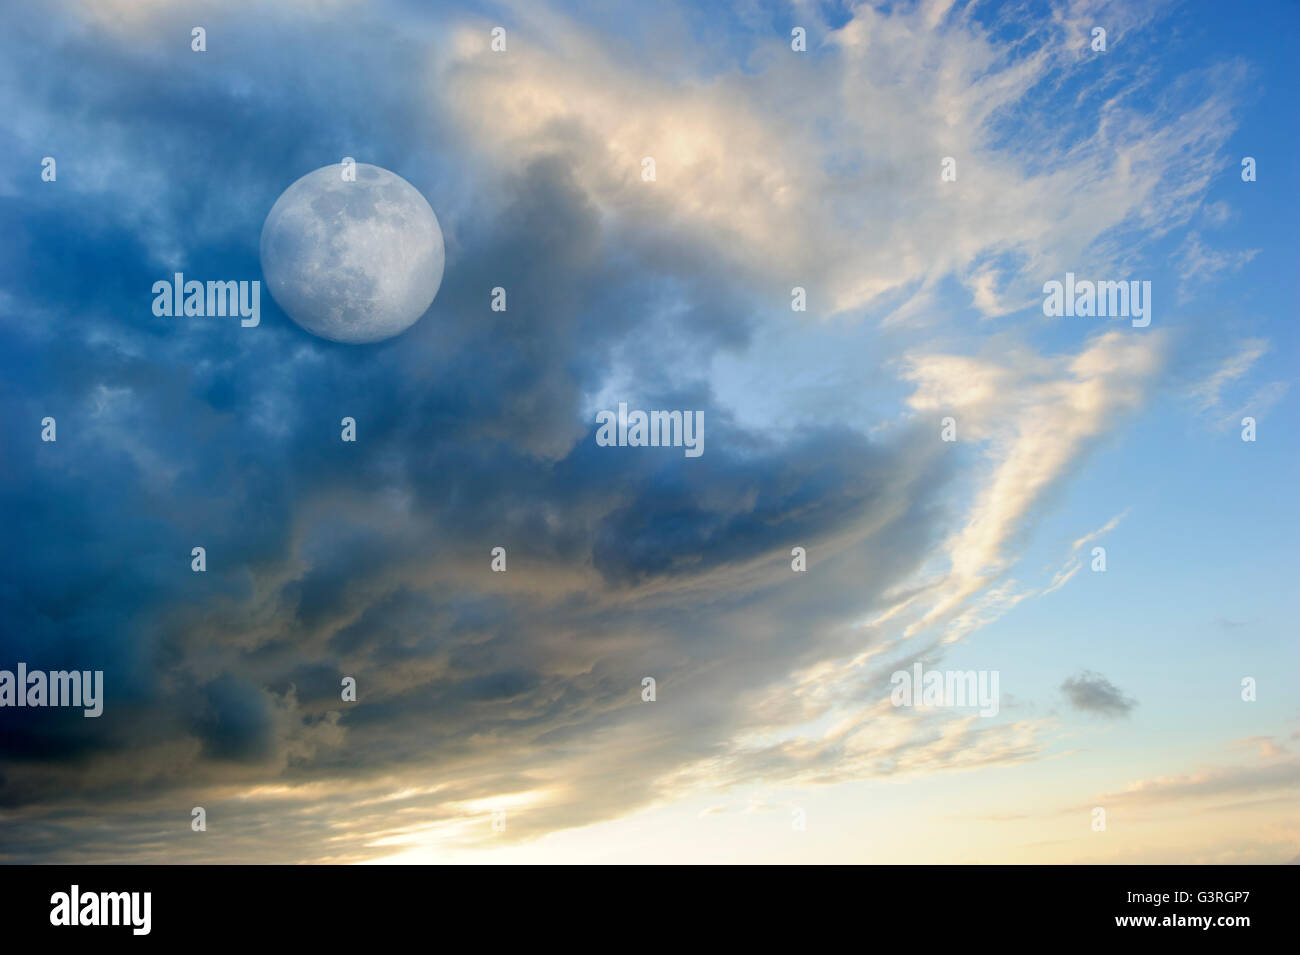 Moon clouds skies is a vibrant surreal fantasy like cloudscape with the ethereal heavenly full moon rising among the clouds. Stock Photo